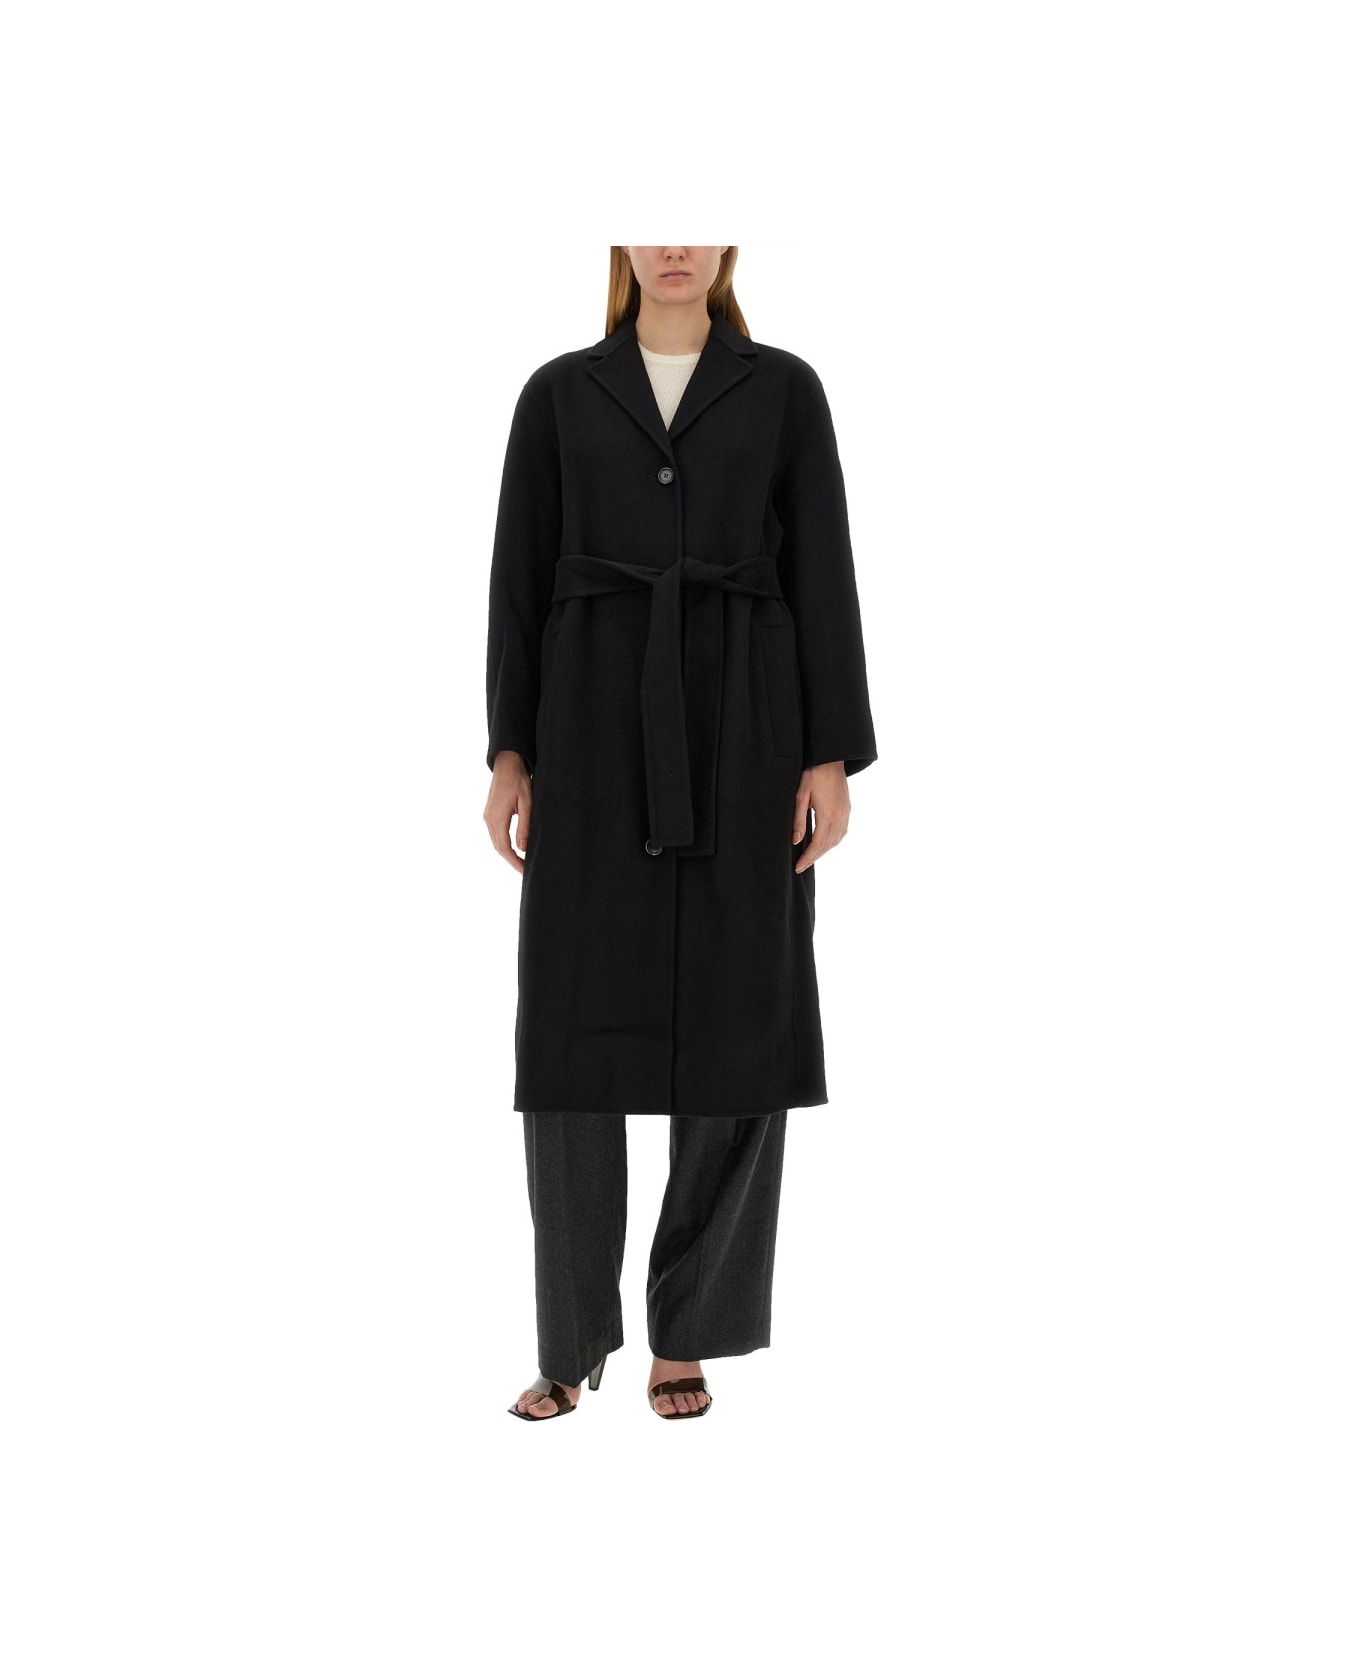 Theory Belted Coat - BLACK